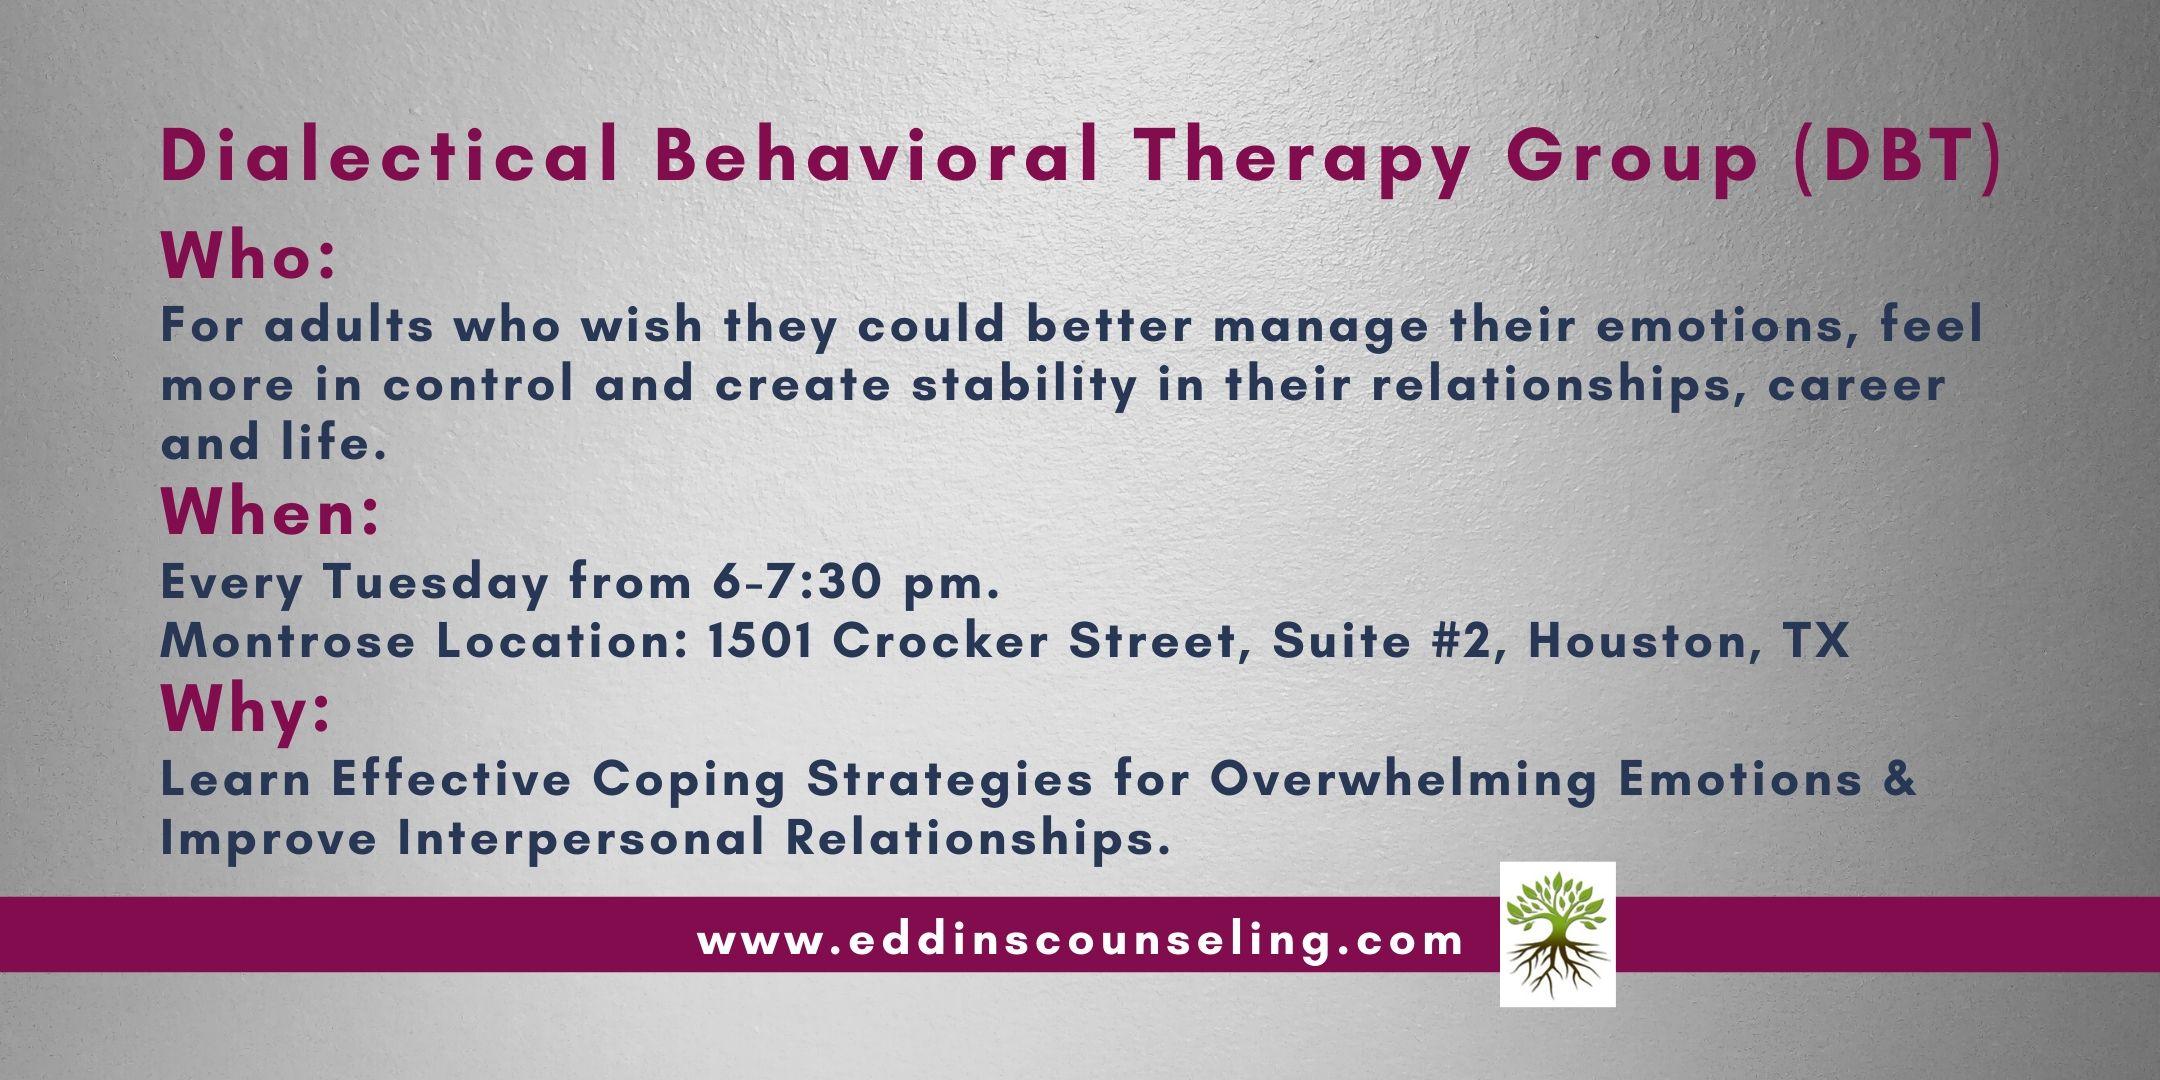 Dialectical Behavioral Therapy Group (DBT)- Evening Group